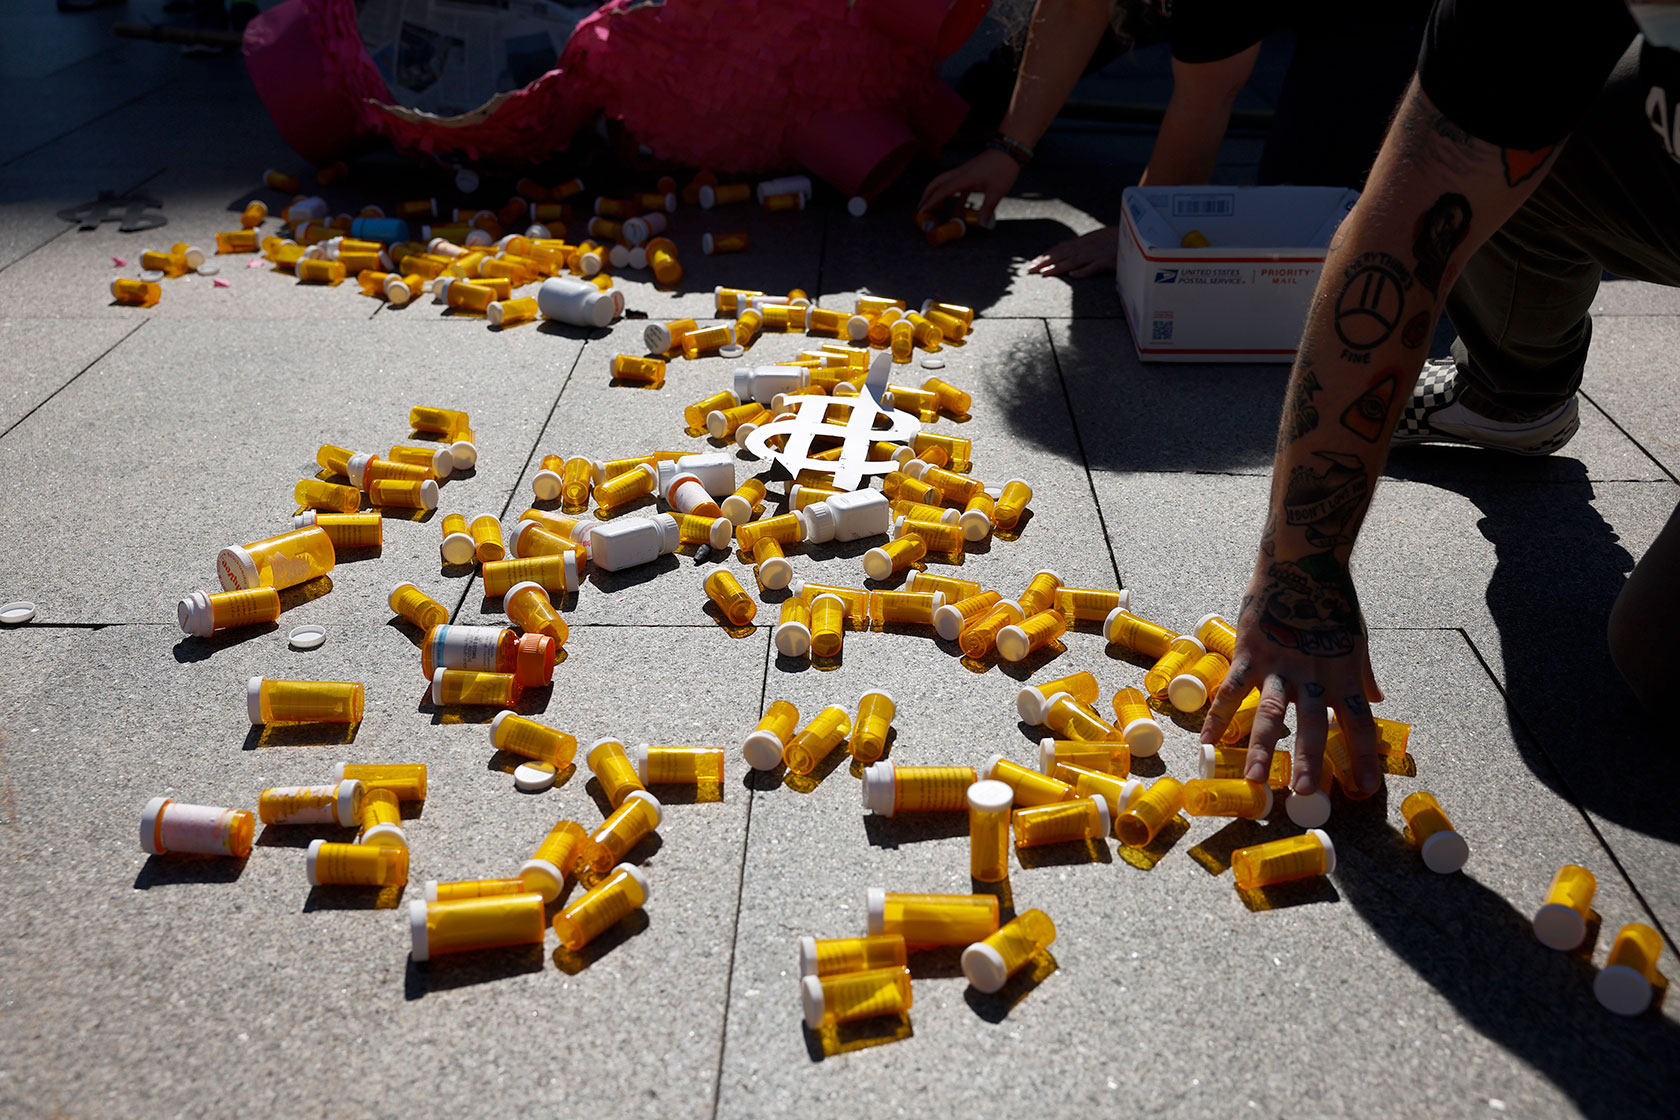 Empty pill bottles are scattered on the sidewalk during a protest.